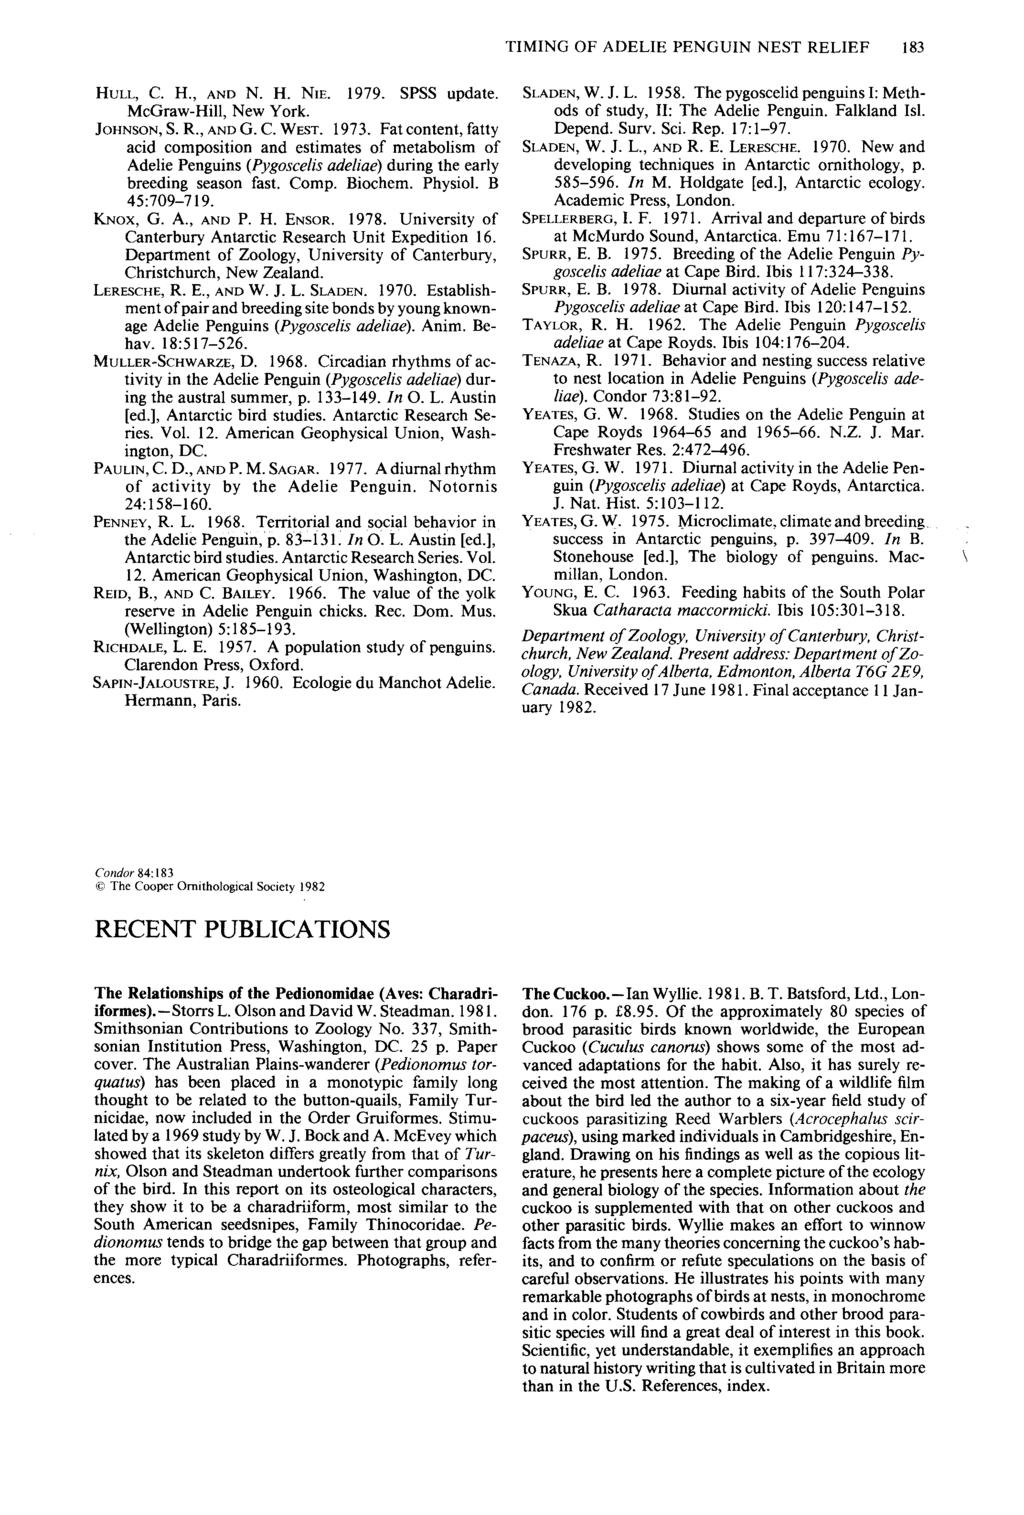 TIMING OF ADELIE PENGUIN NEST RELIEF 183 HULL, C. H., AND N. H. NIE. 1979. SPSS update. McGraw-Hill, New York. JOHNSON, S. R., AND G. C. WEST. 1973.